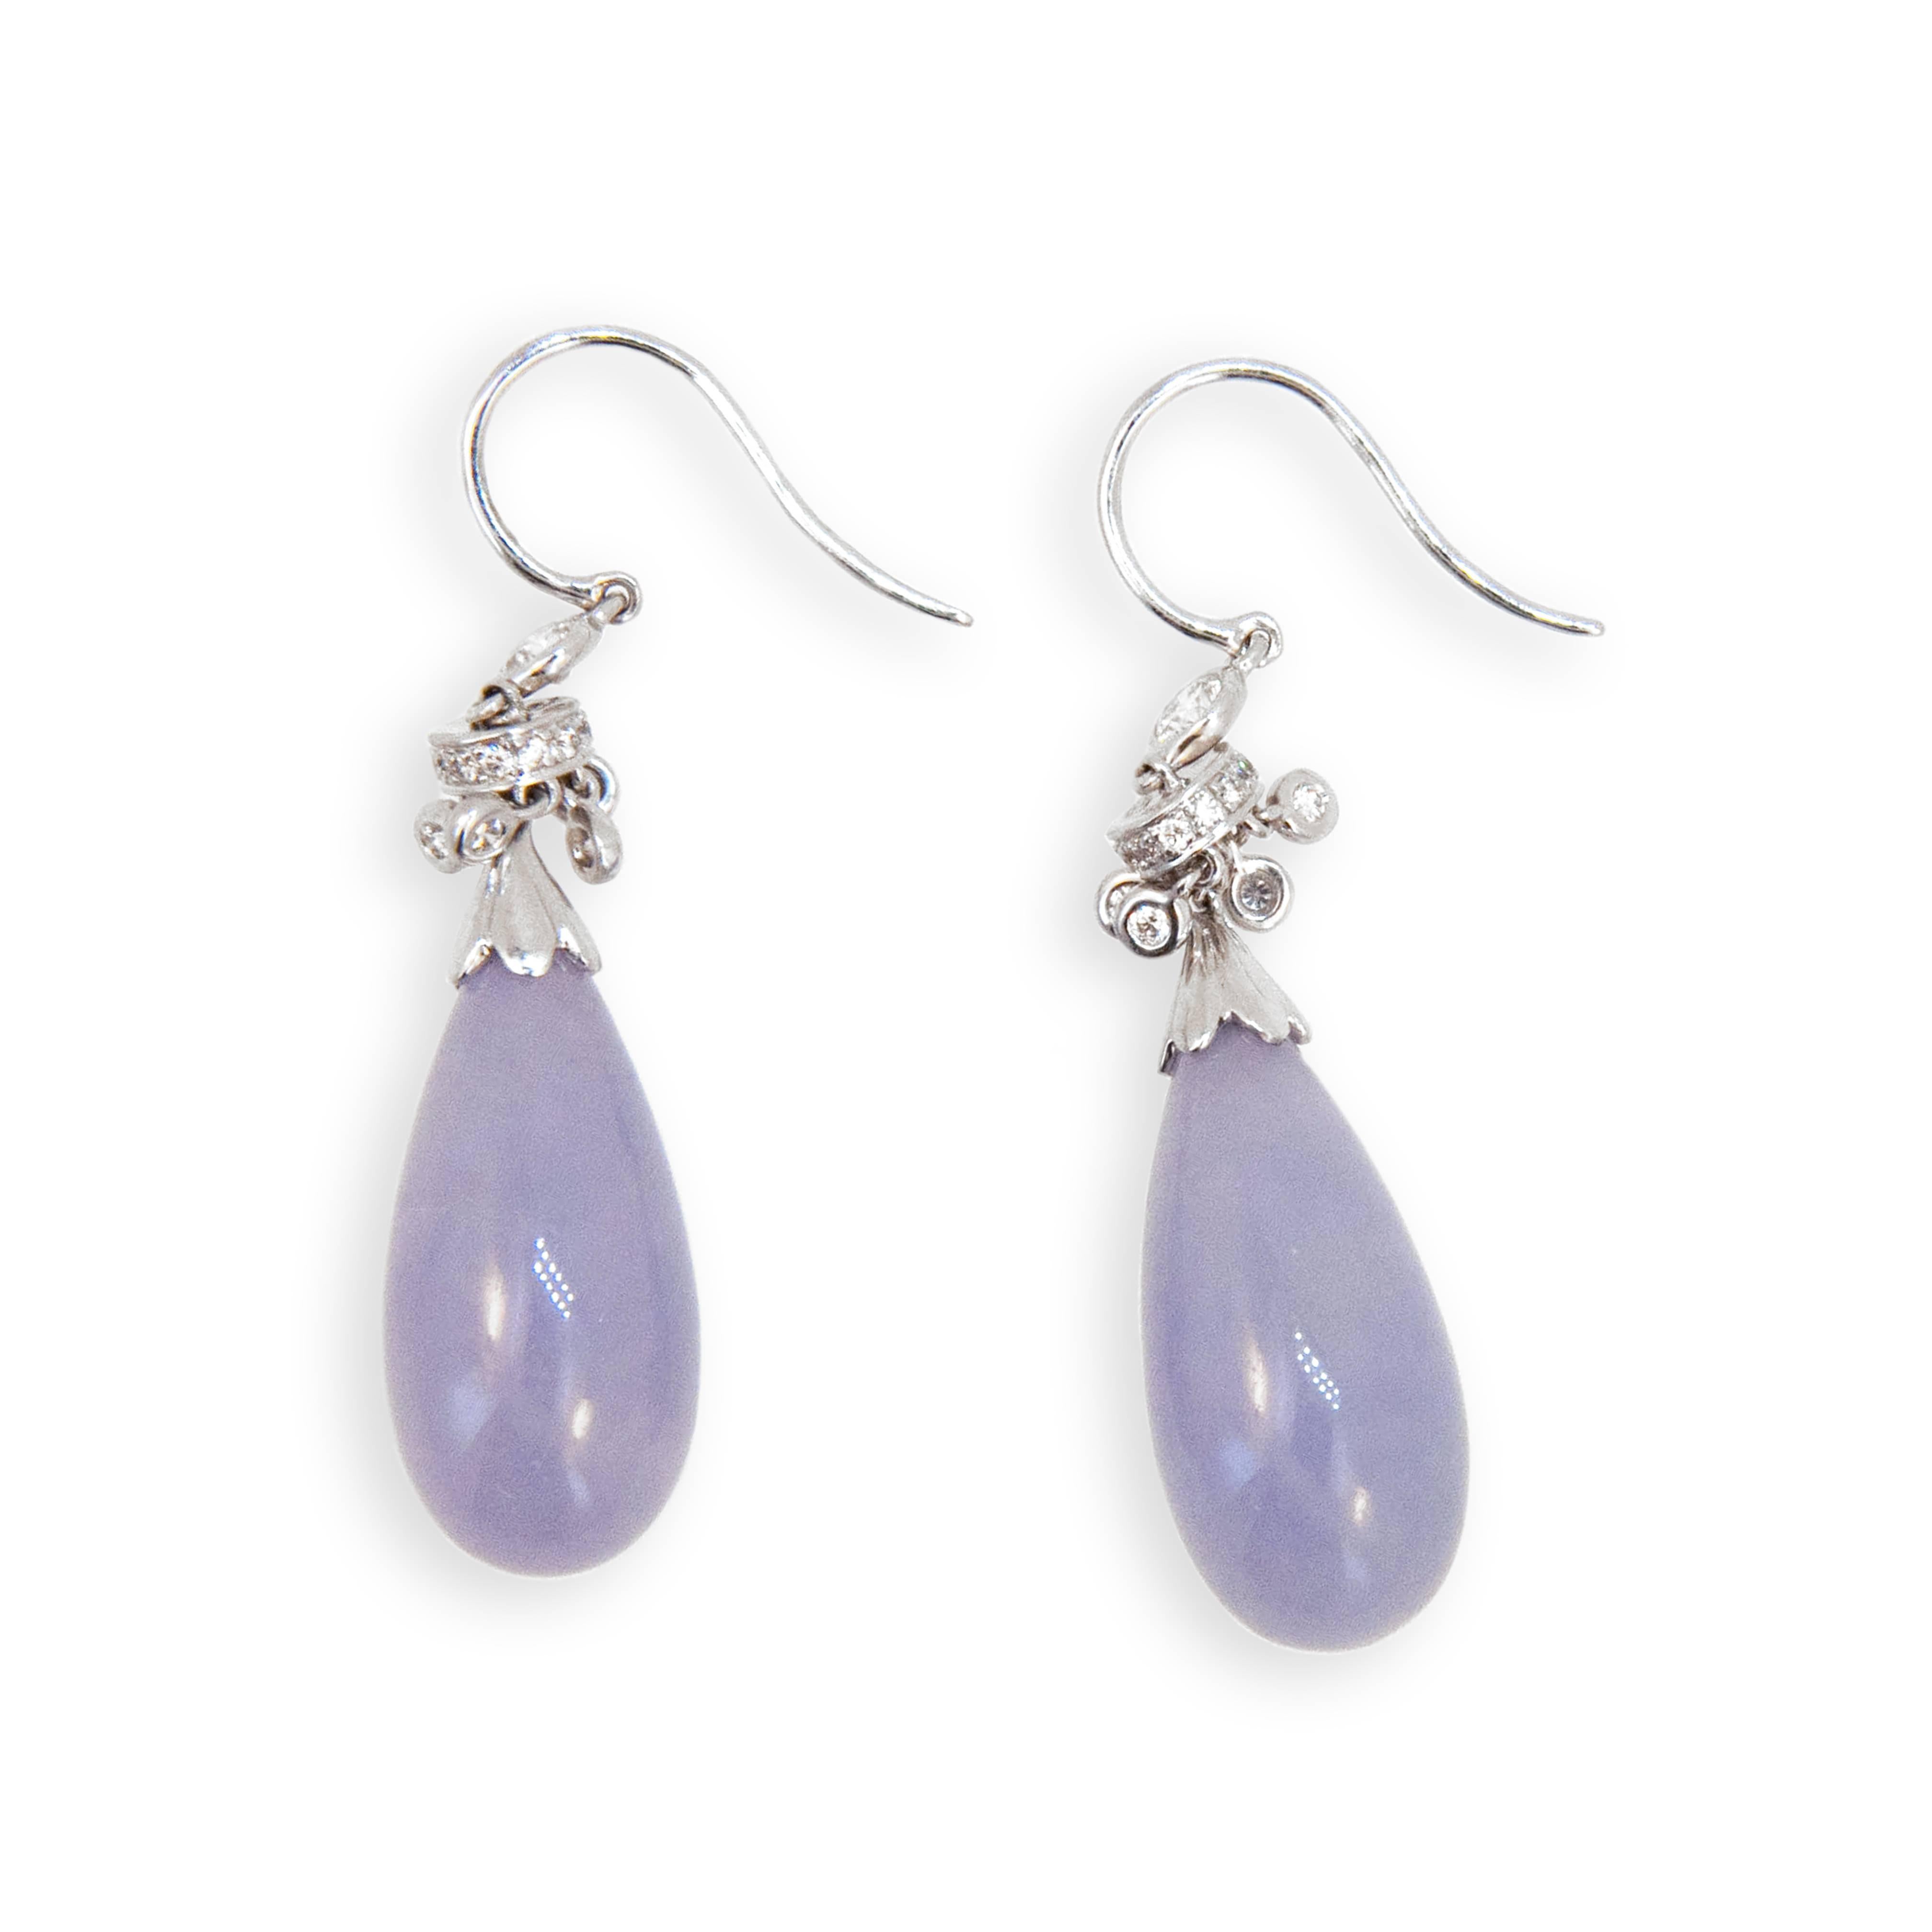 18 karat white gold earrings Lavender Jade drops with Diamond tops each set with 17 full-cut Diamonds 34 weigh .51 carat total weight. 
10 bezel set and 24 set in rondelles. Wires.